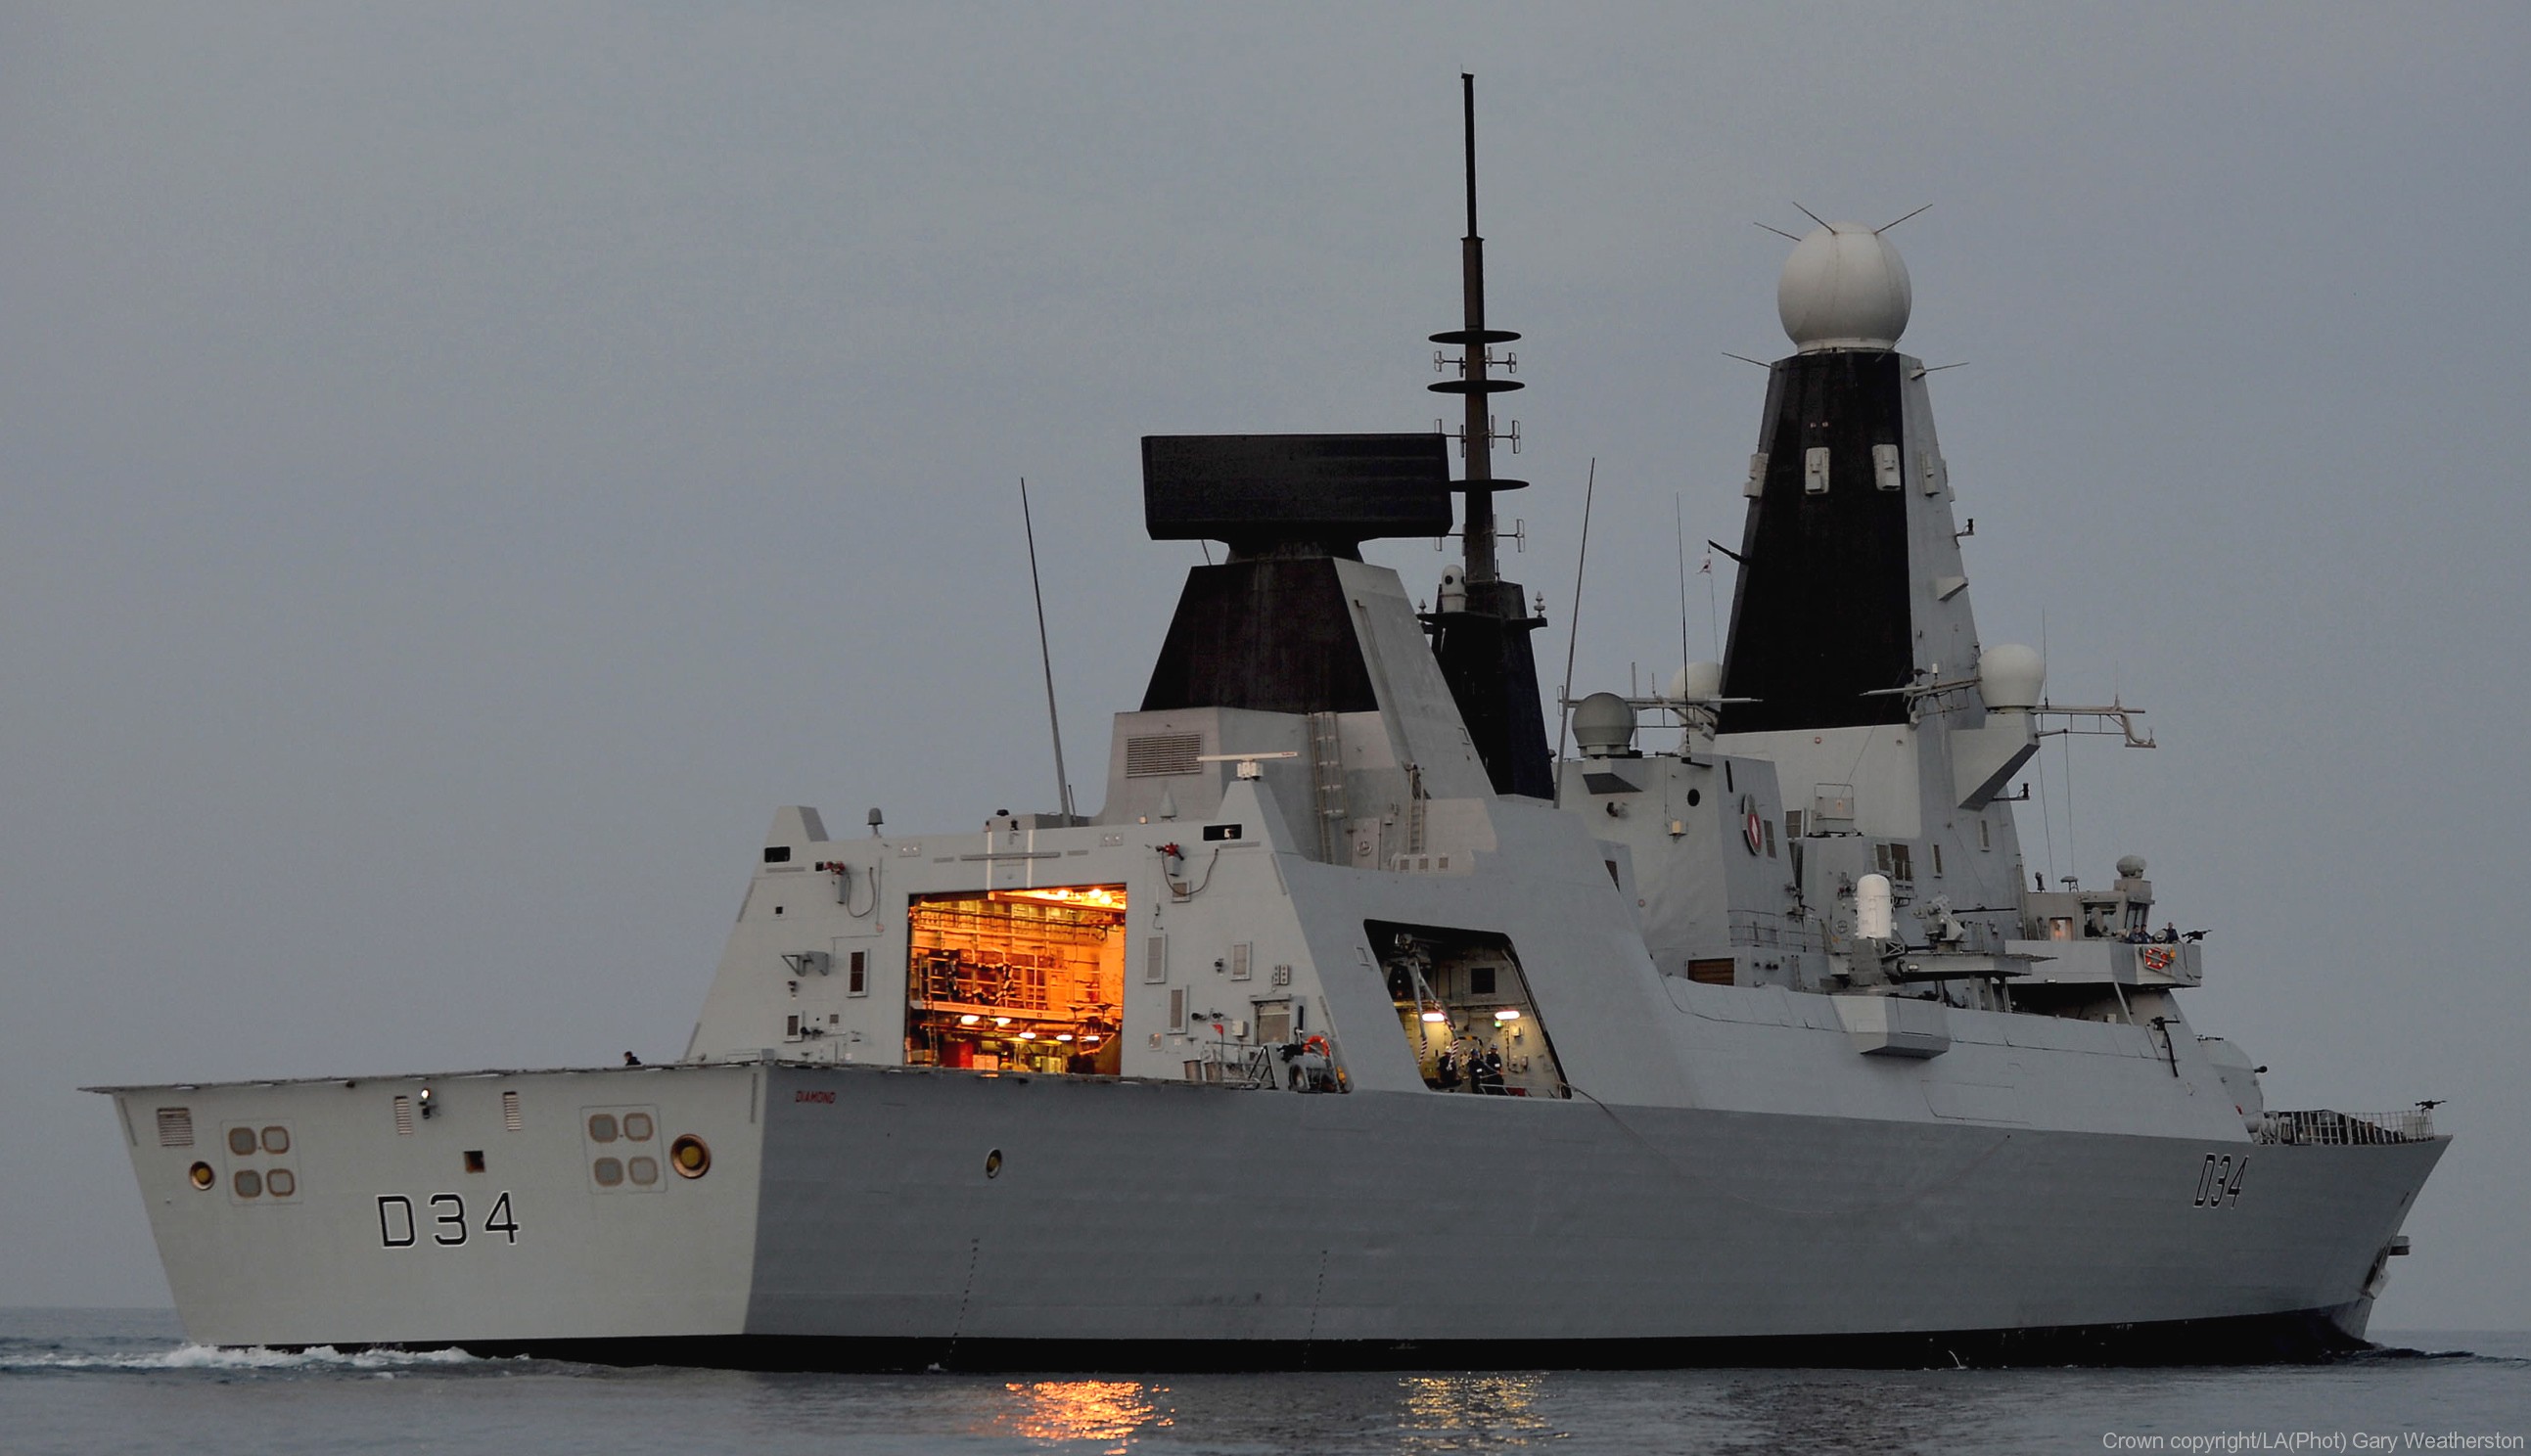 hms diamond d-34 type 45 daring class guided missile destroyer ddg royal navy sea viper paams 11